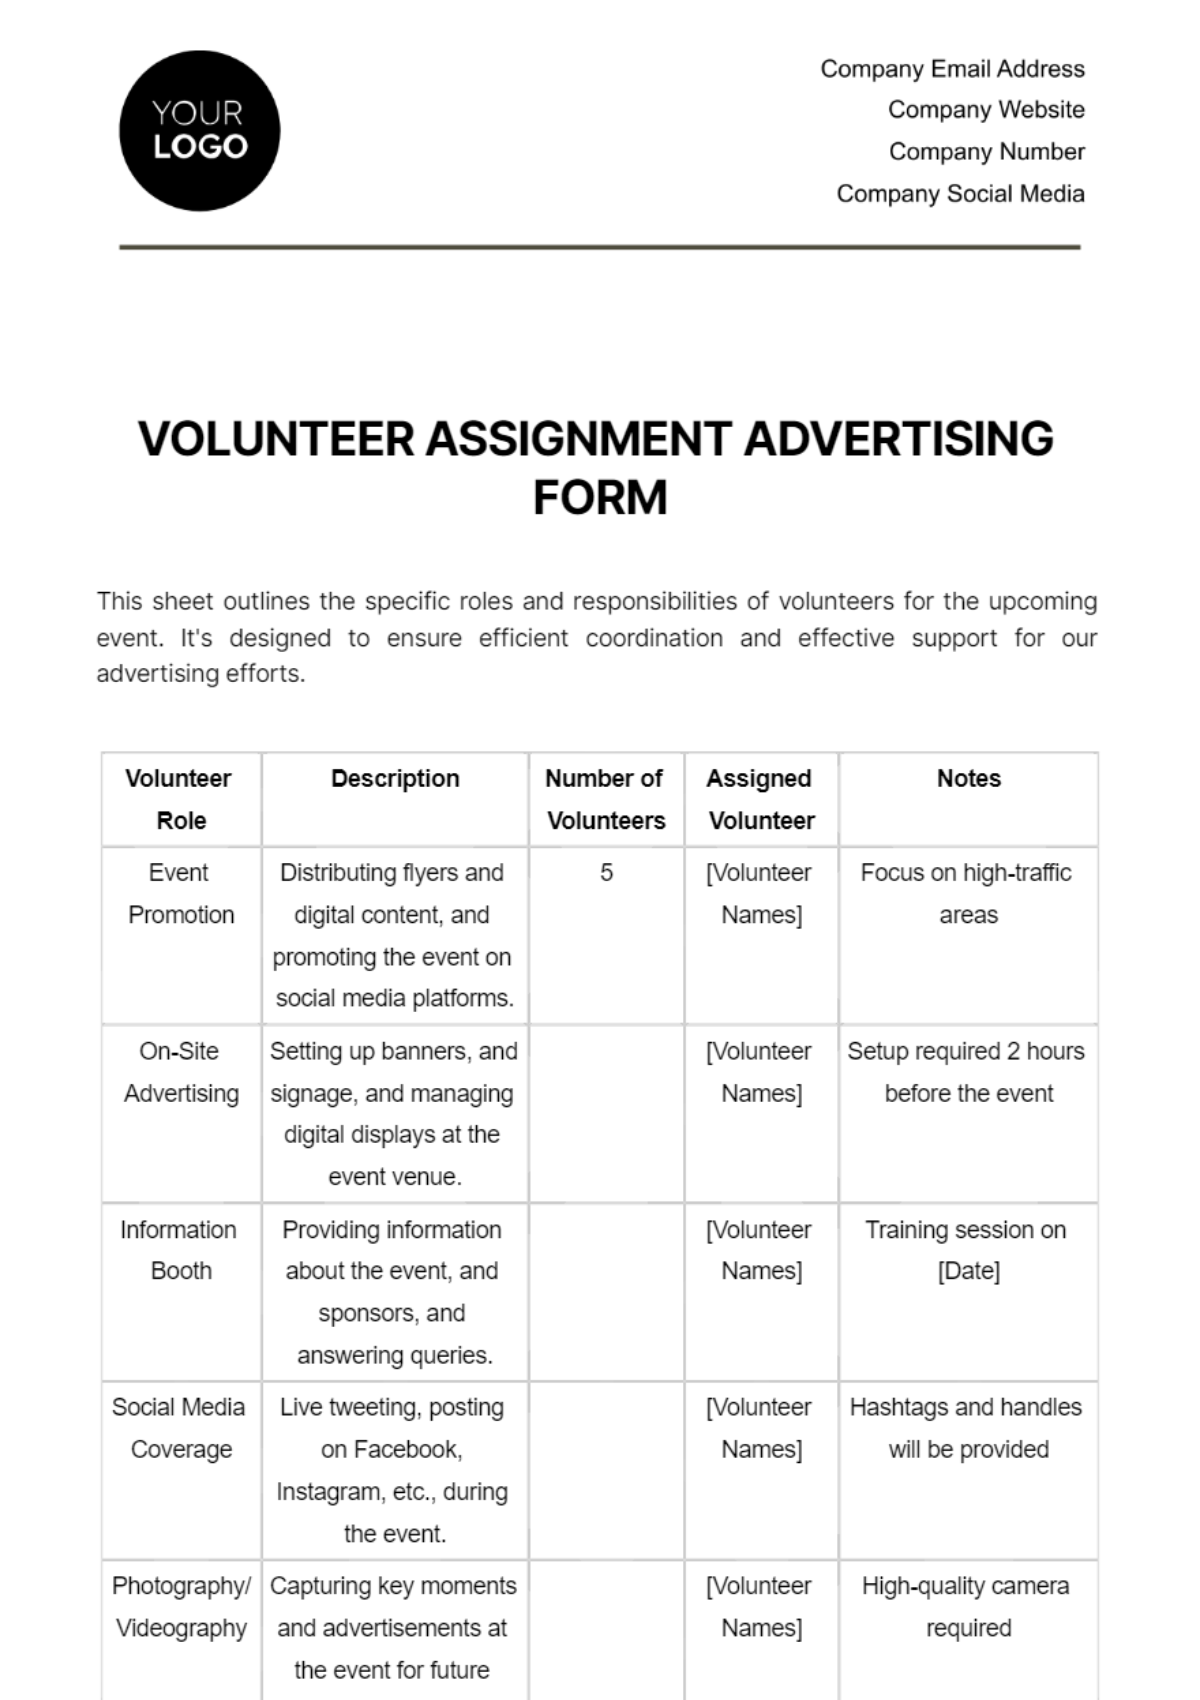 Free Volunteer Assignment Advertising Form Template